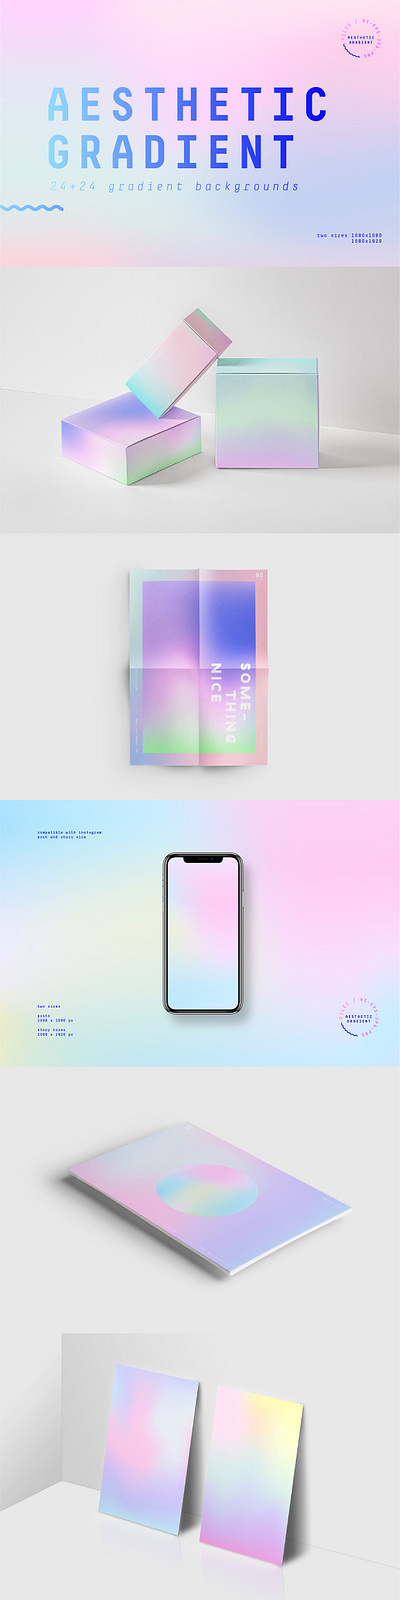 Aesthetic Gradient abstract abstract background aesthetic gradient art blurred background colorful background graphic instagram stories instagram template mesh modern pattern background vector vector texture vibrant